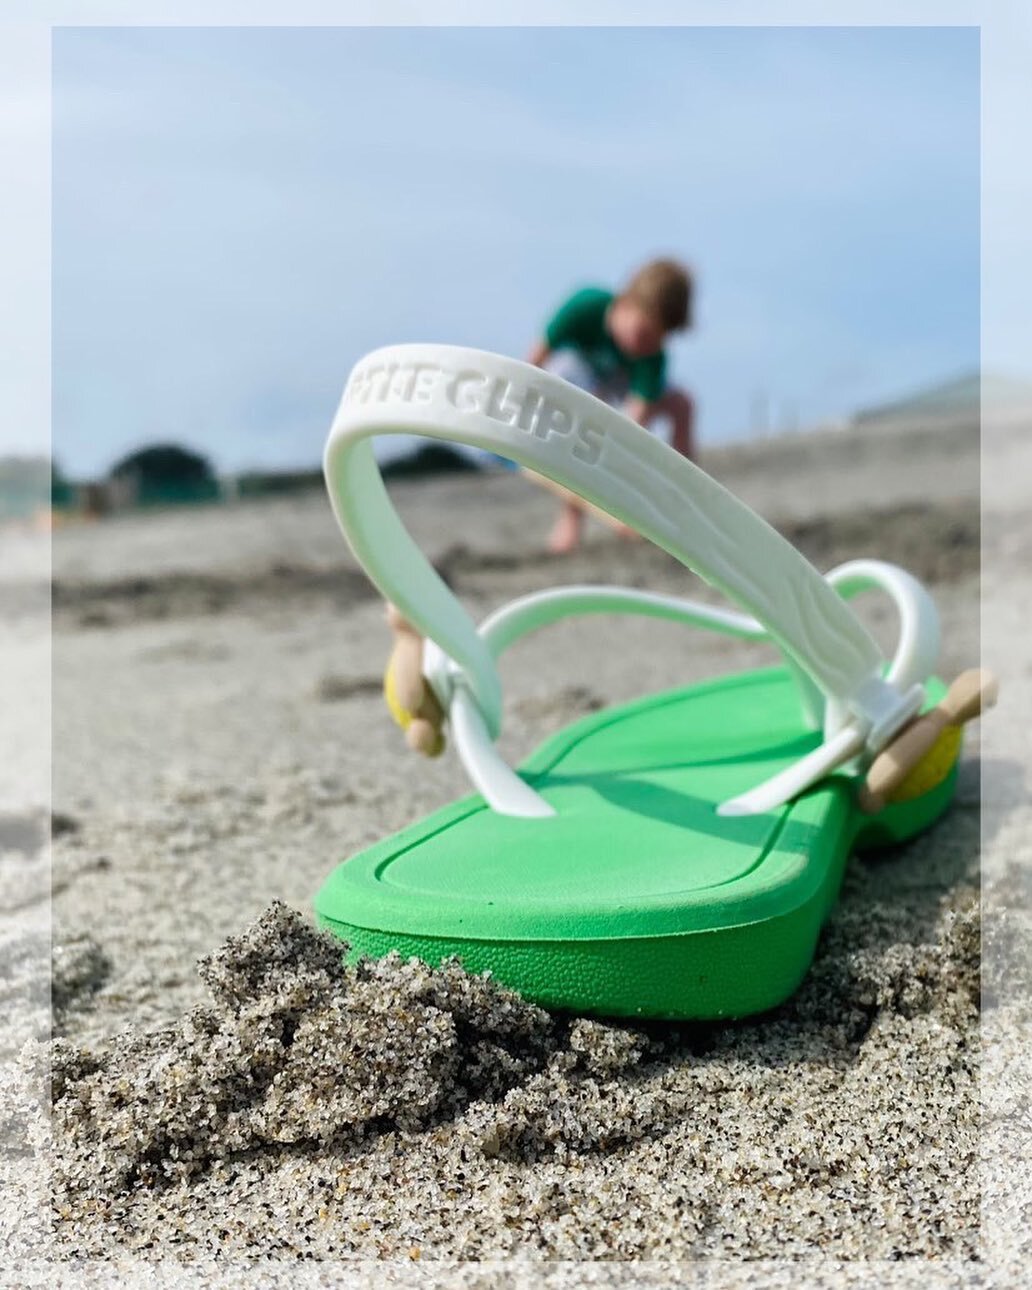 Finally a flip flop day!! 😉💚🩴

📍Location - Cornwall
📷Photography - Danni 
👉🏻 Model - Toby
🩴Flipflops @myturtleclips 

Available in the UK online and in store from @barefootboyhoodies in Salcombe 💙

#seathedifference
#turtleclips
#turtleclips